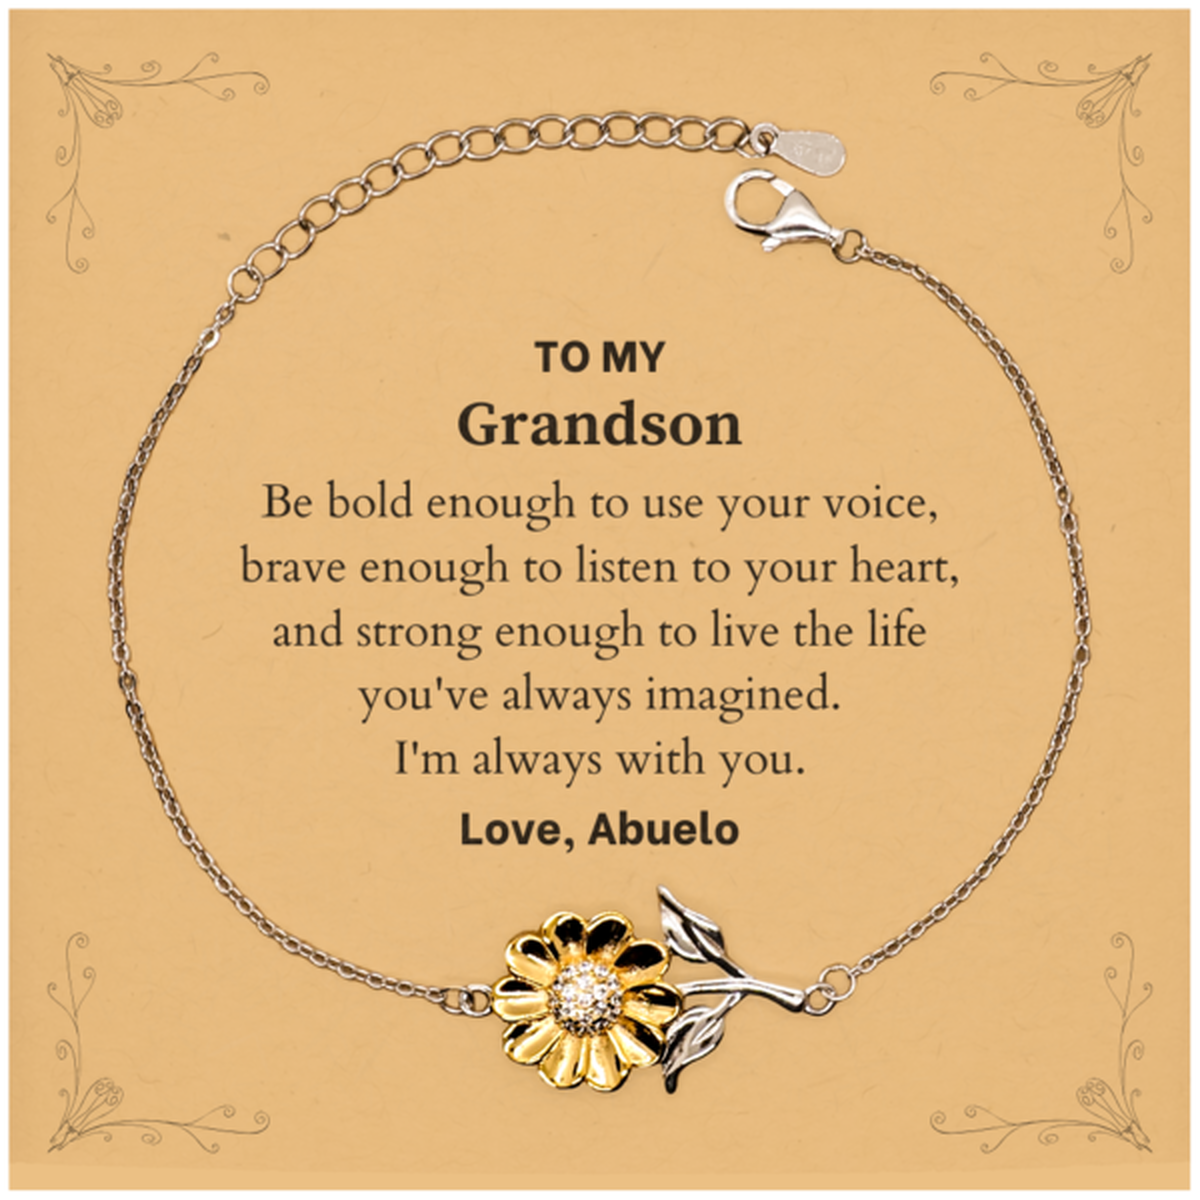 Keepsake Grandson Sunflower Bracelet Gift Idea Graduation Christmas Birthday Grandson from Abuelo, Grandson Be bold enough to use your voice, brave enough to listen to your heart. Love, Abuelo